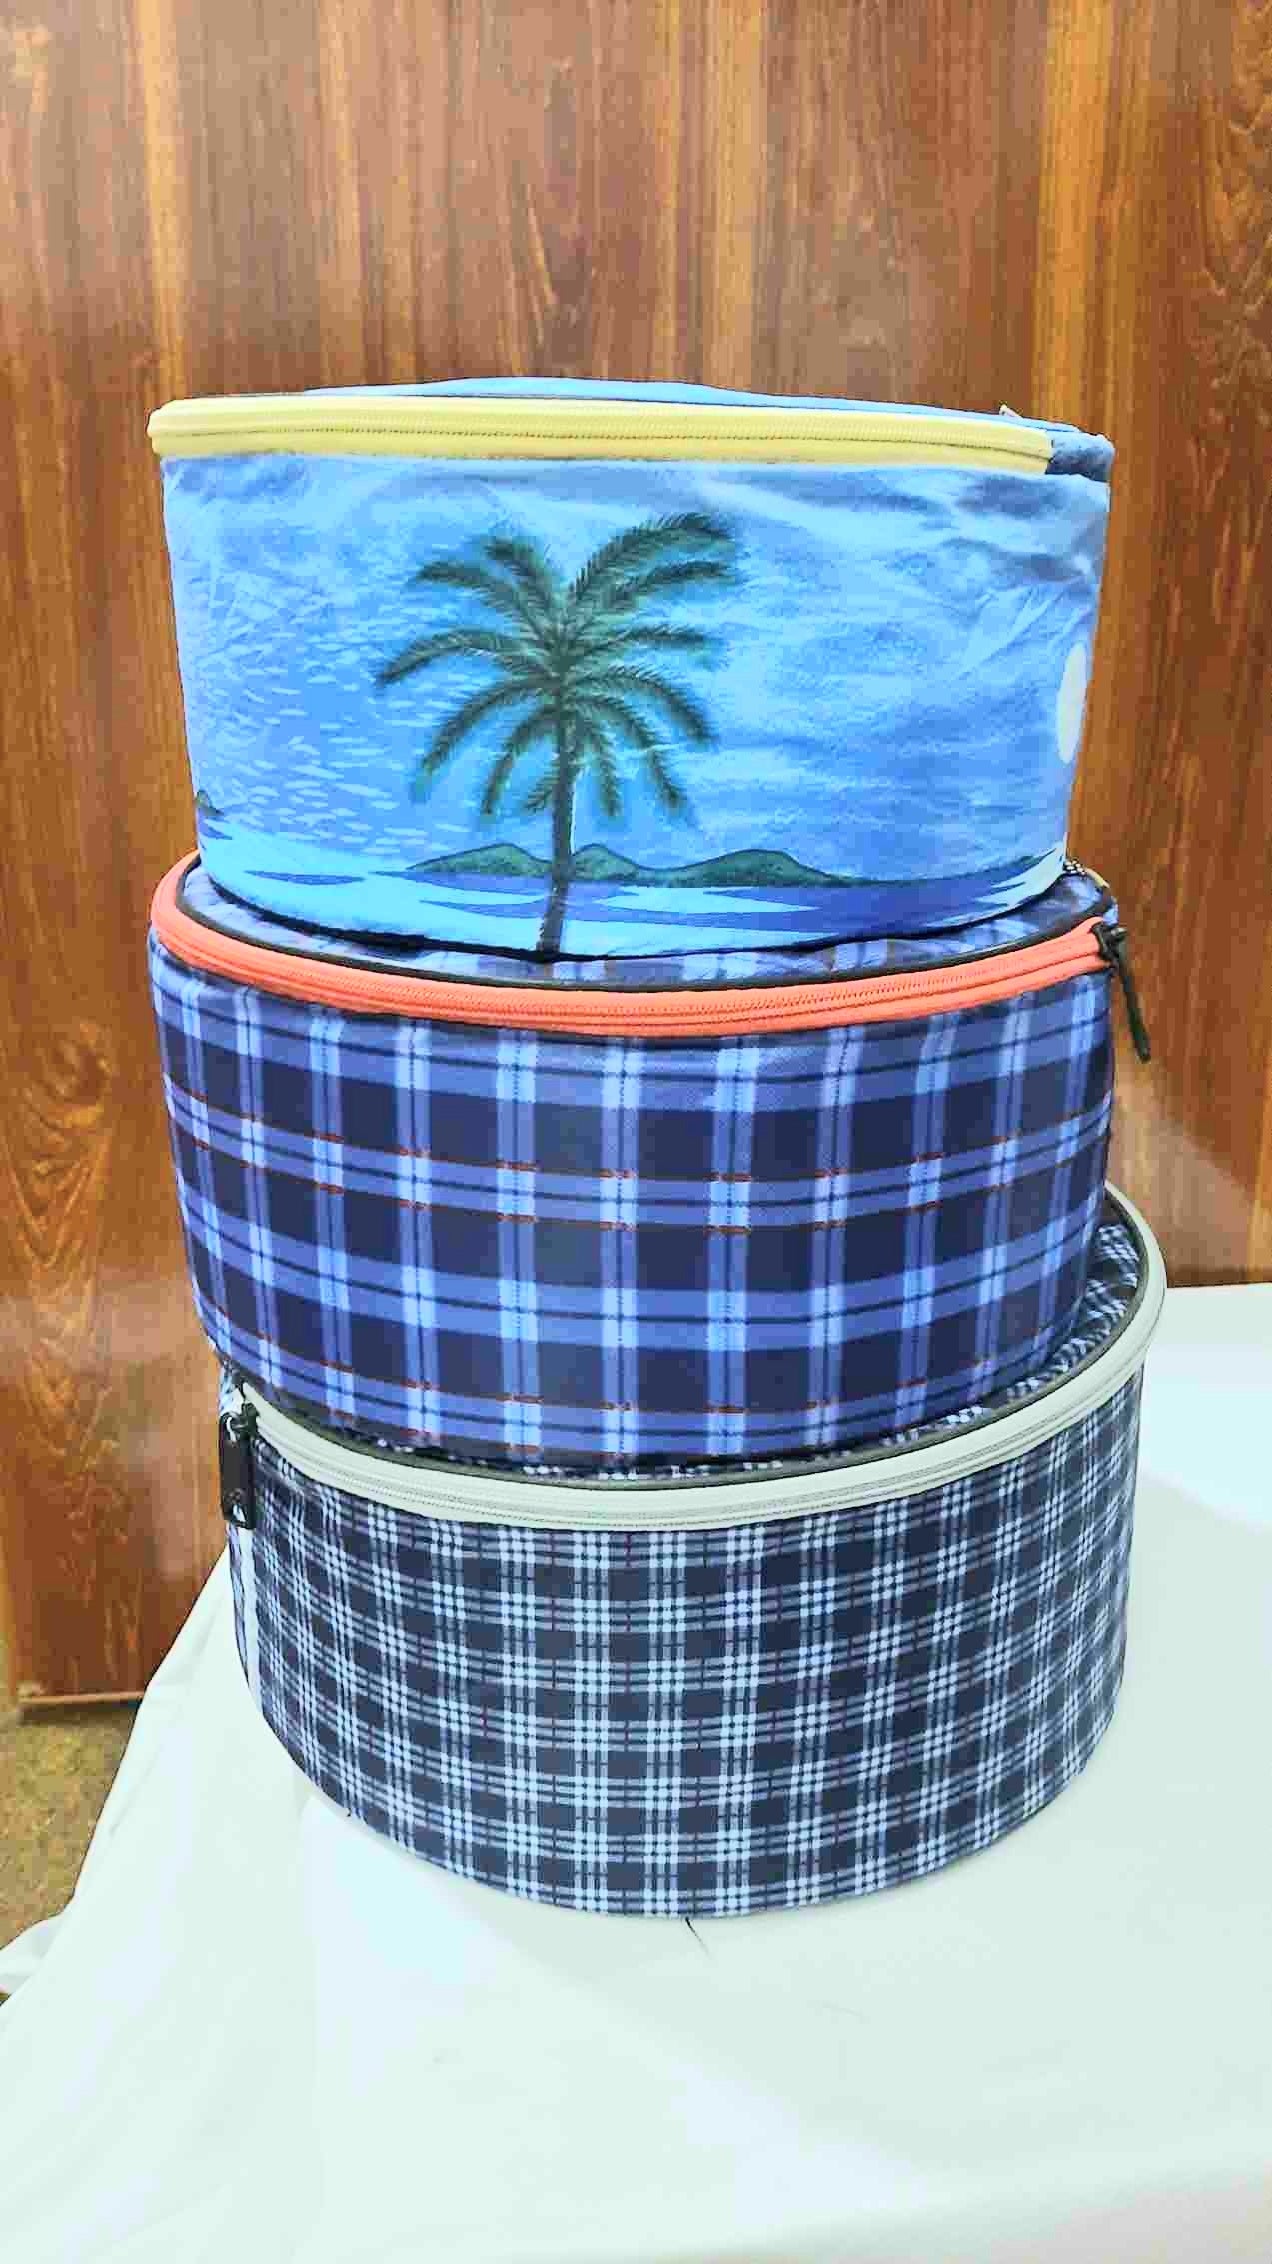 3 Pieces Double Insulated Picnic Bag